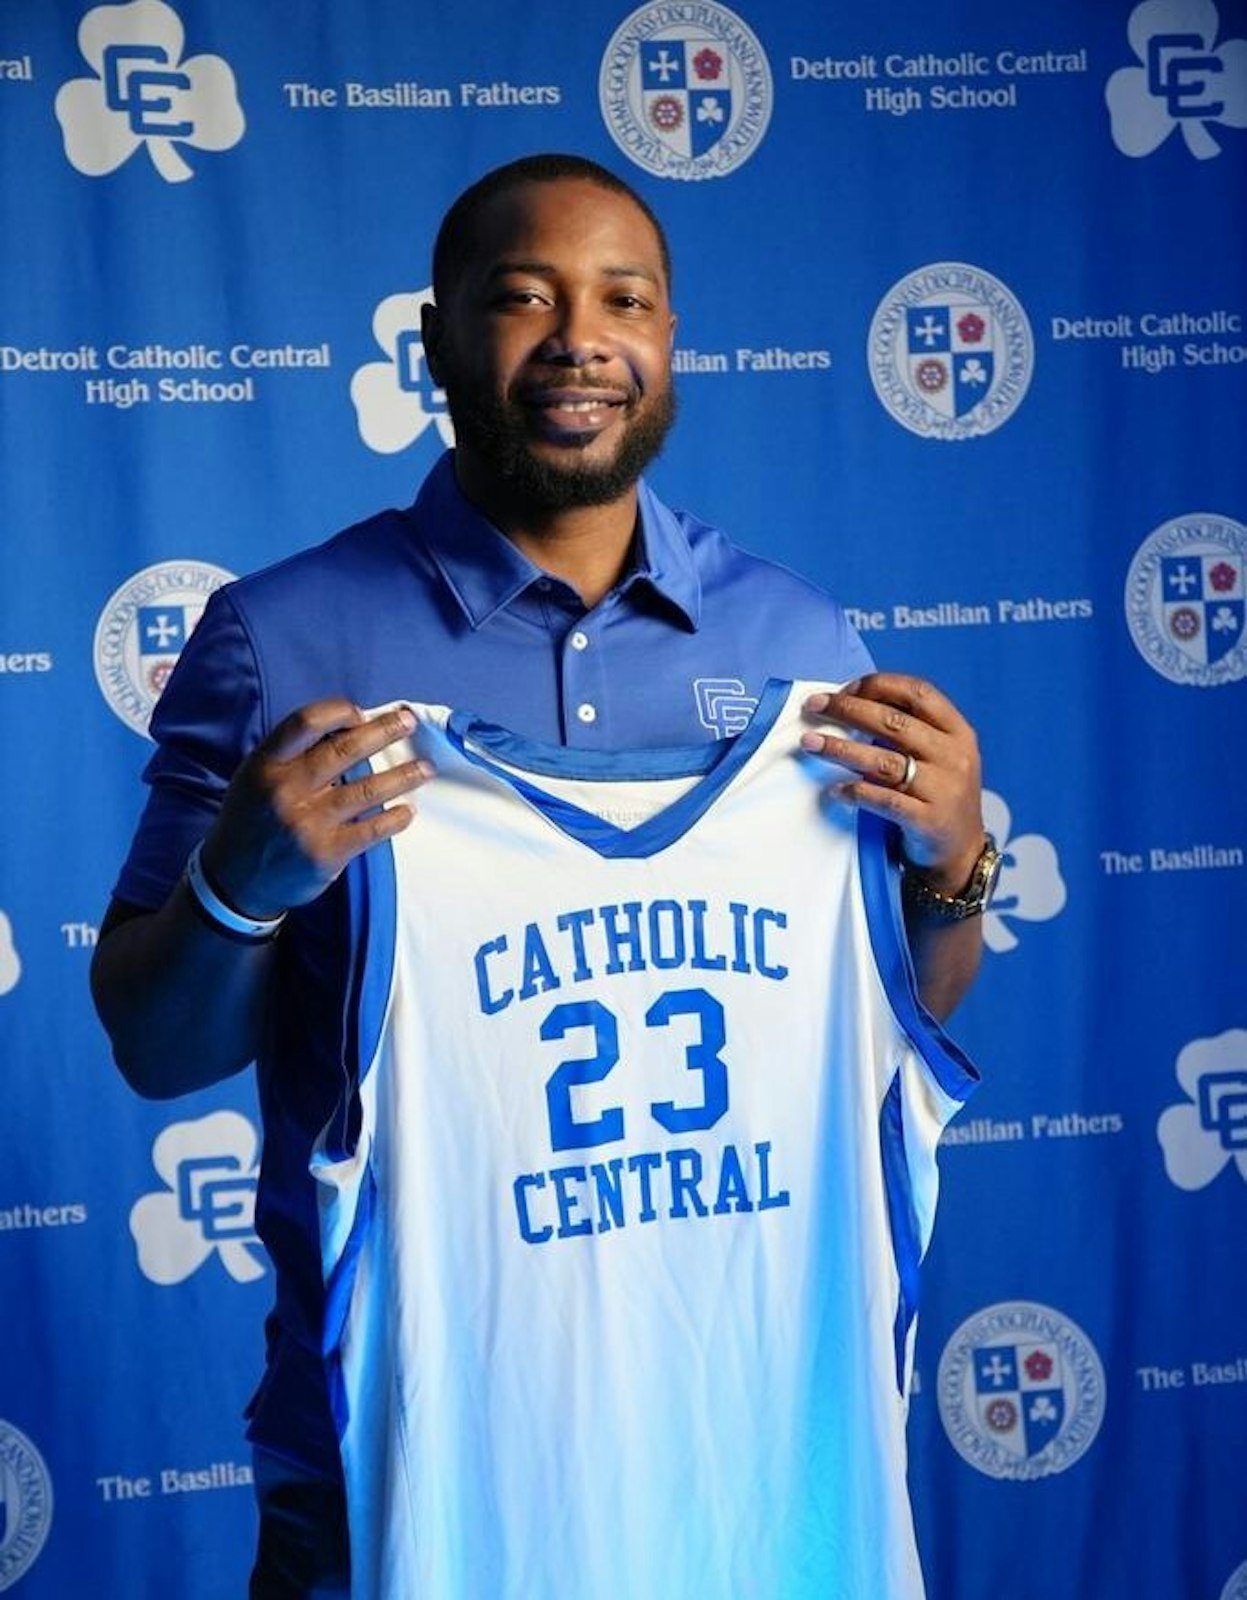 Tory Jackson is the fifth head basketball coach in Catholic Central’s history. “In a lot of ways CC is like a mini version of Notre Dame,” where he was captain of the Fighting Irish team his senior year. “Notre Dame is my second home, so for me this feels like coming home,” he said. (Photo courtesy of Catholic Central Athletic Department)